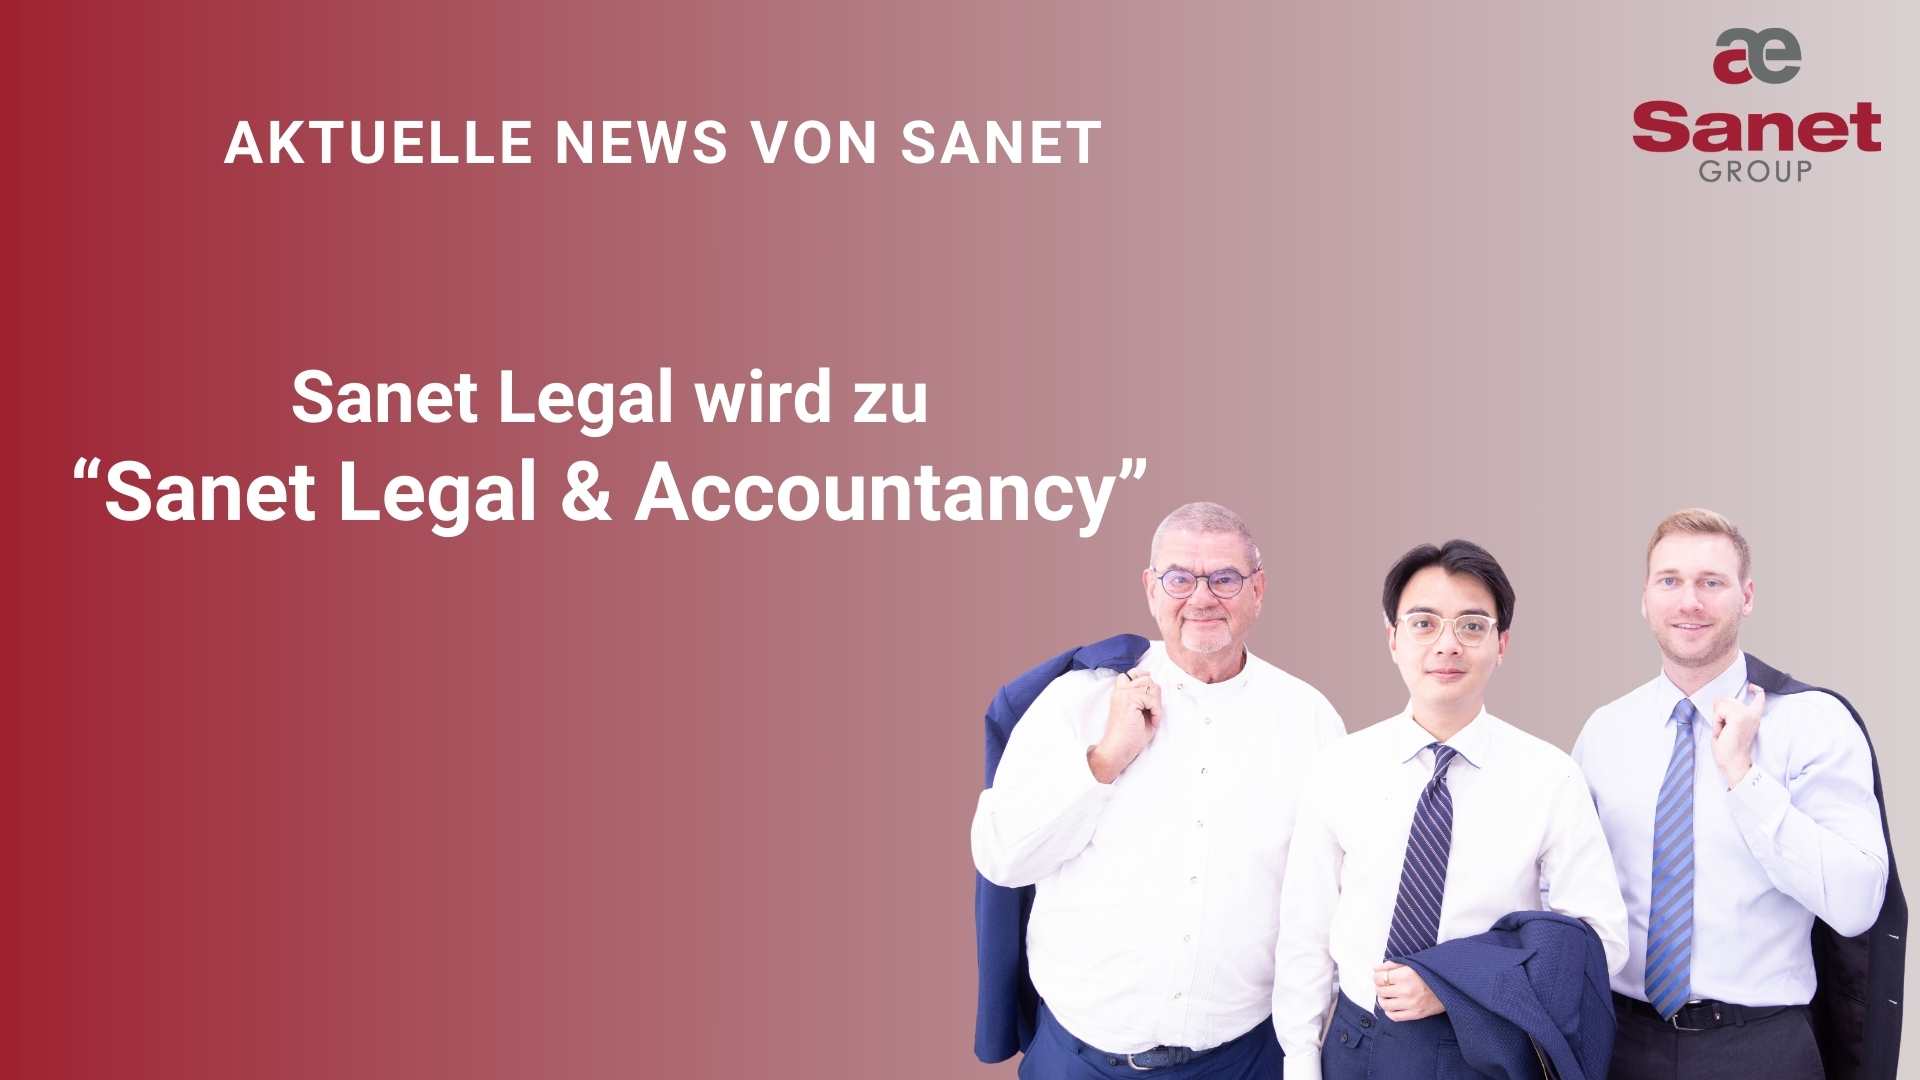 Sanet Legal & Finance offers customized accounting for SMEs in Thailand including reporting, evaluations, payroll and tax returns